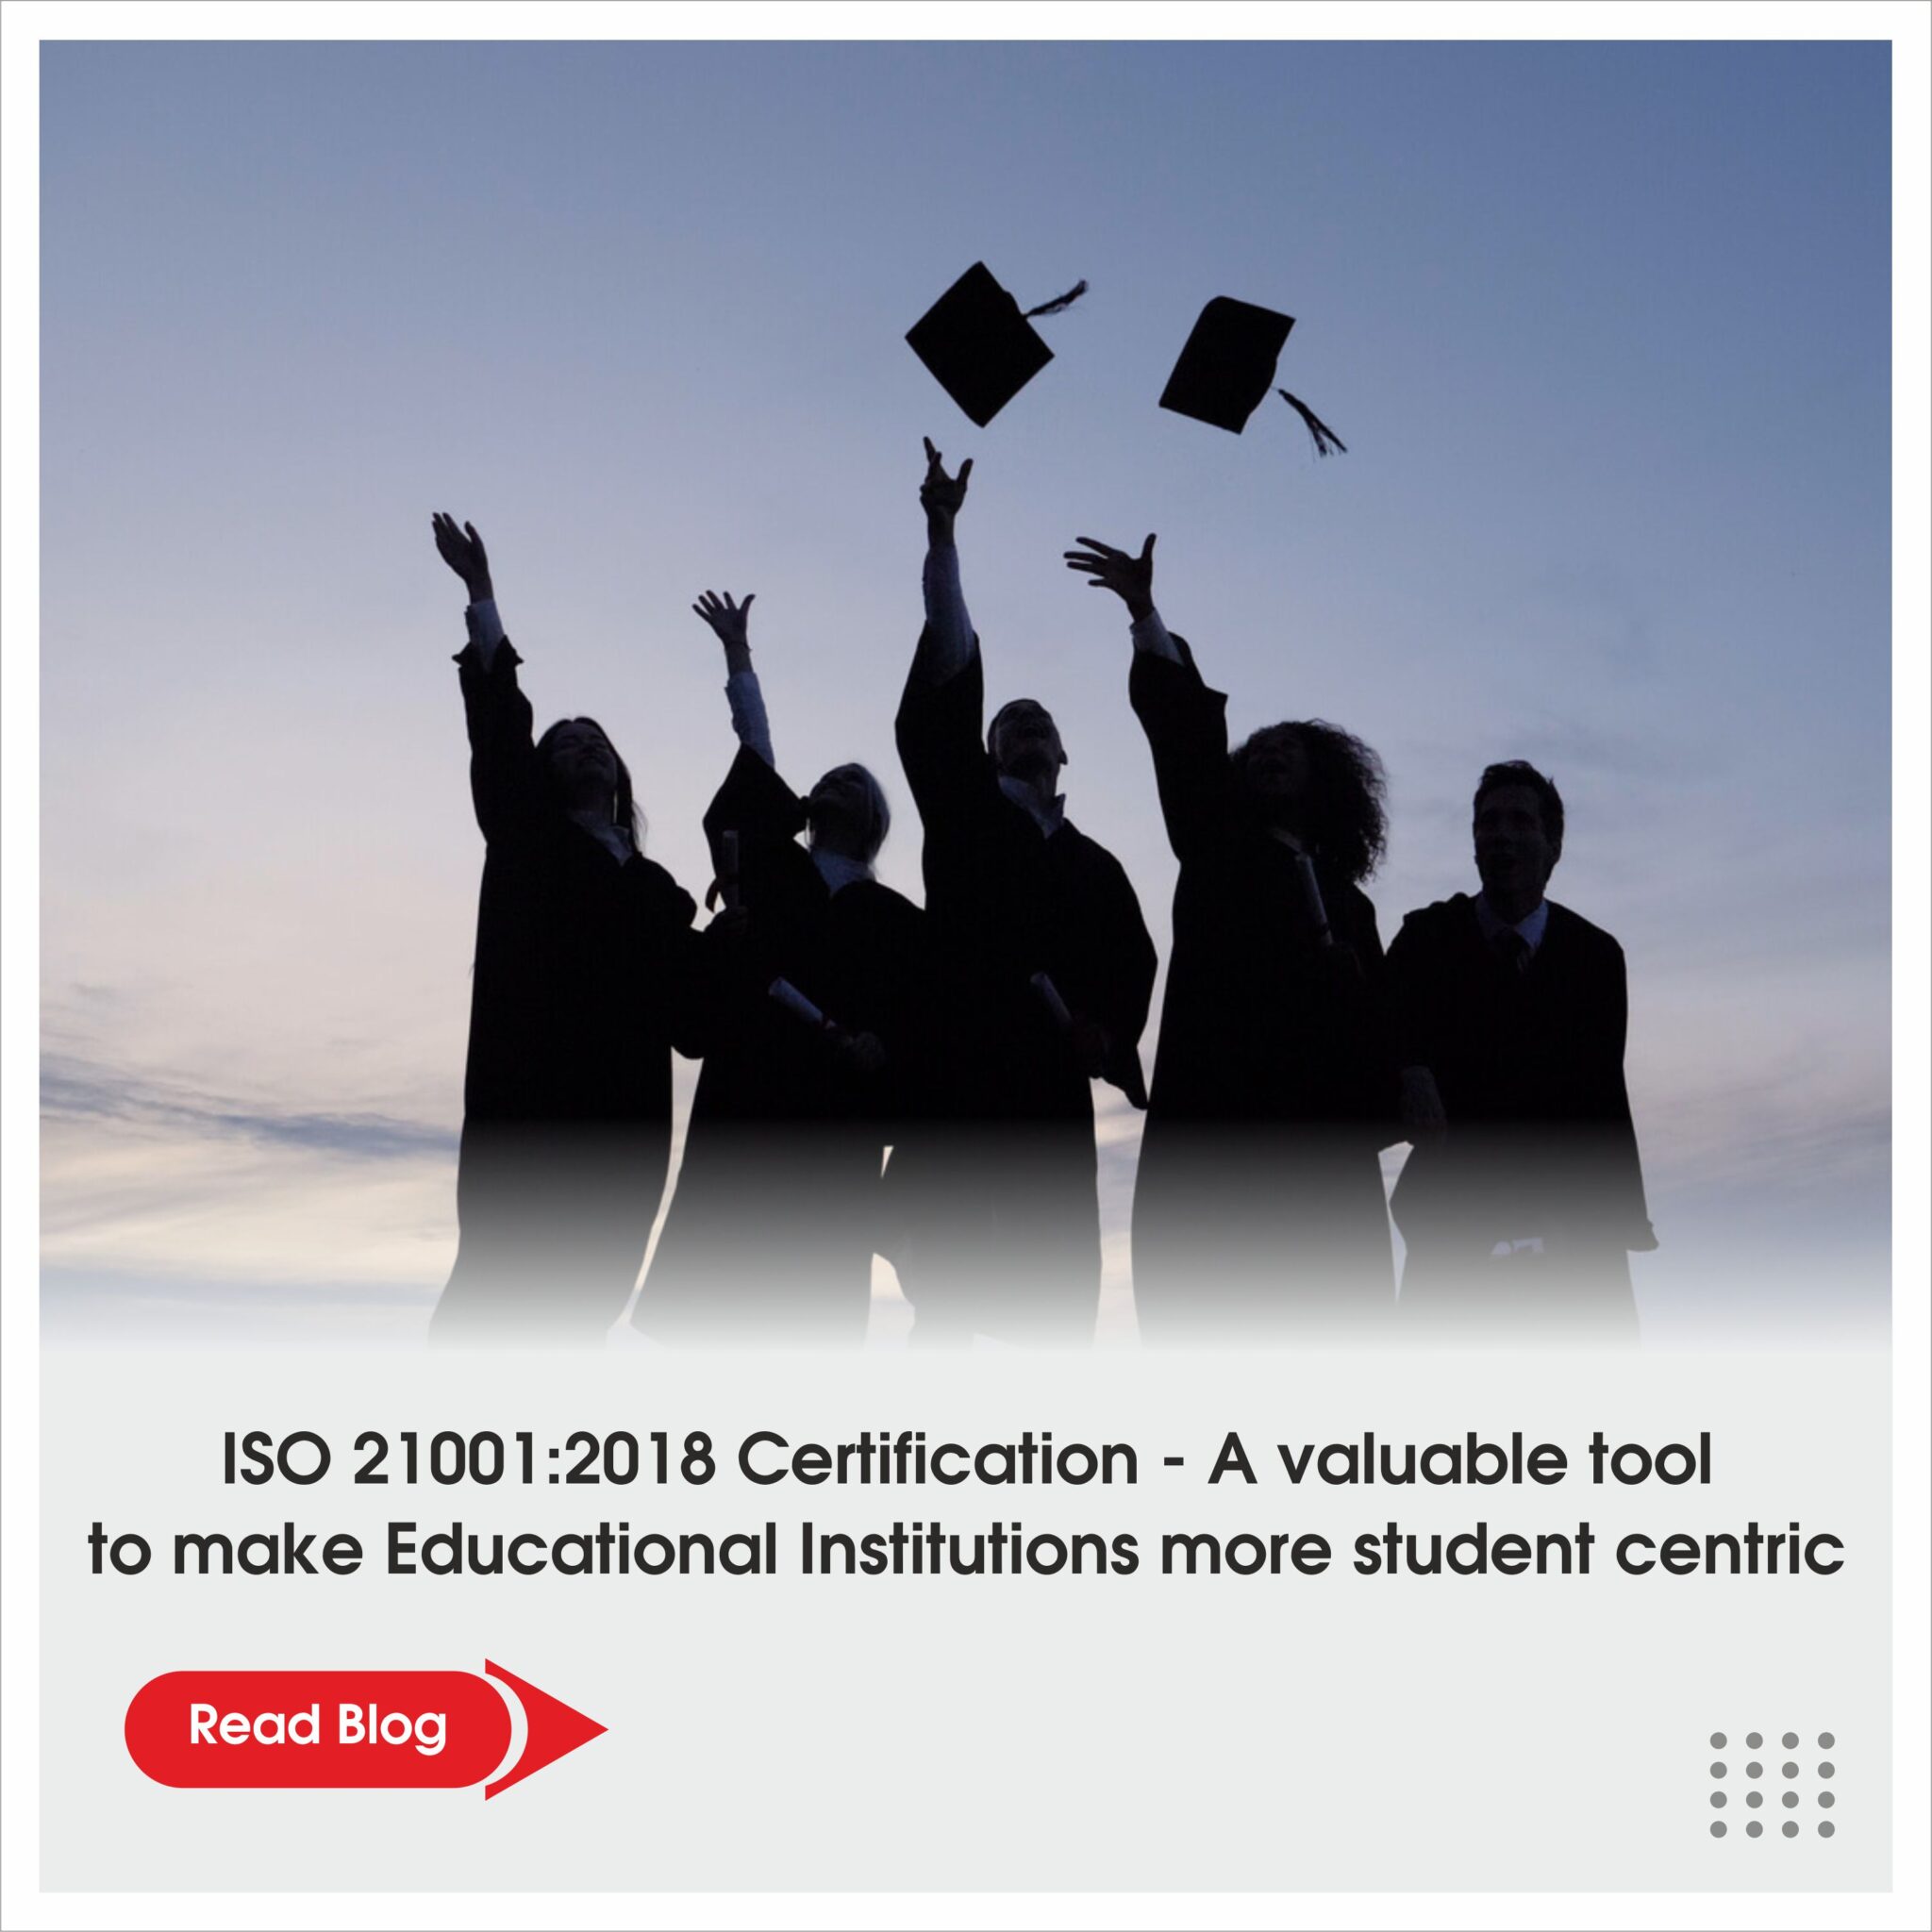 ISO-21001-2018-Certification-A-valuable-tool-to-make-Educational-Institutions-more-student-centric-2048x2048